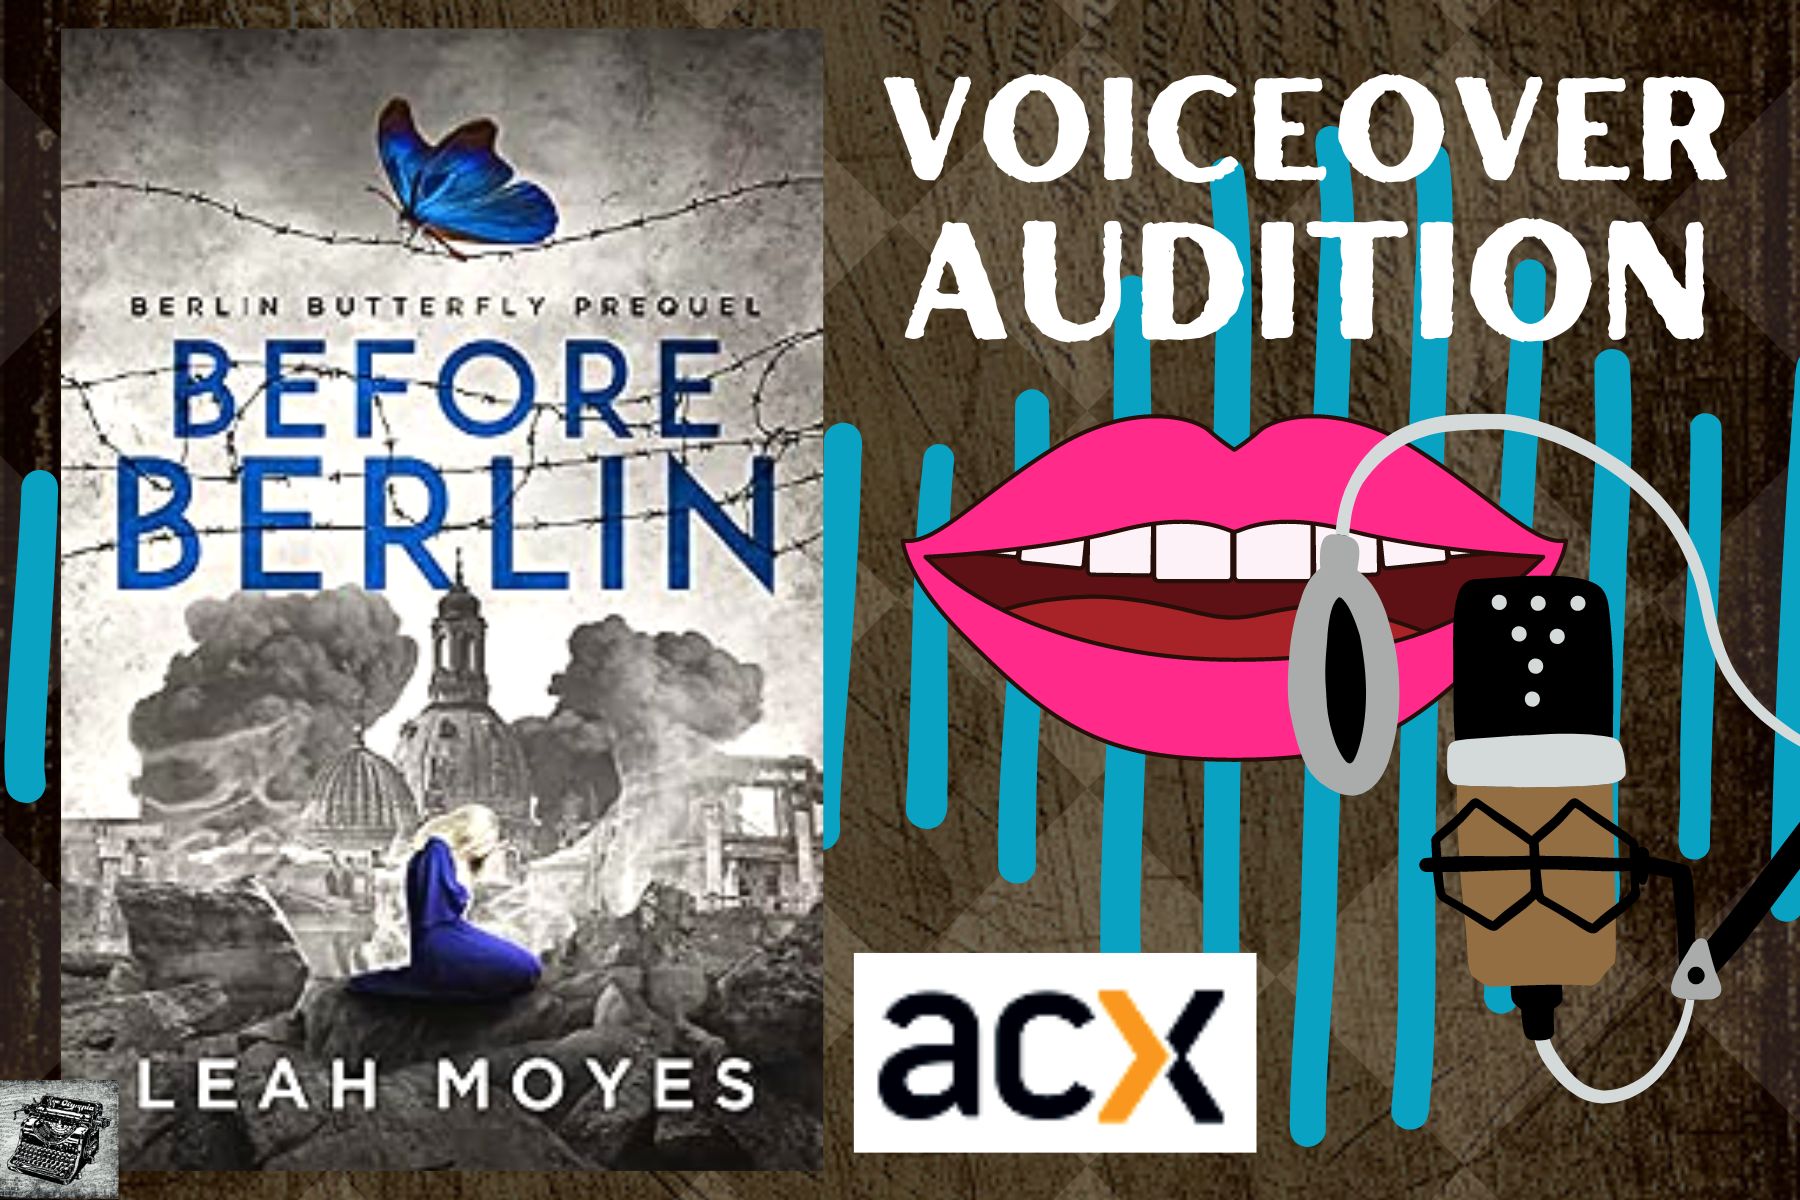 ACX Audio Audition for the Book “Before Berlin”